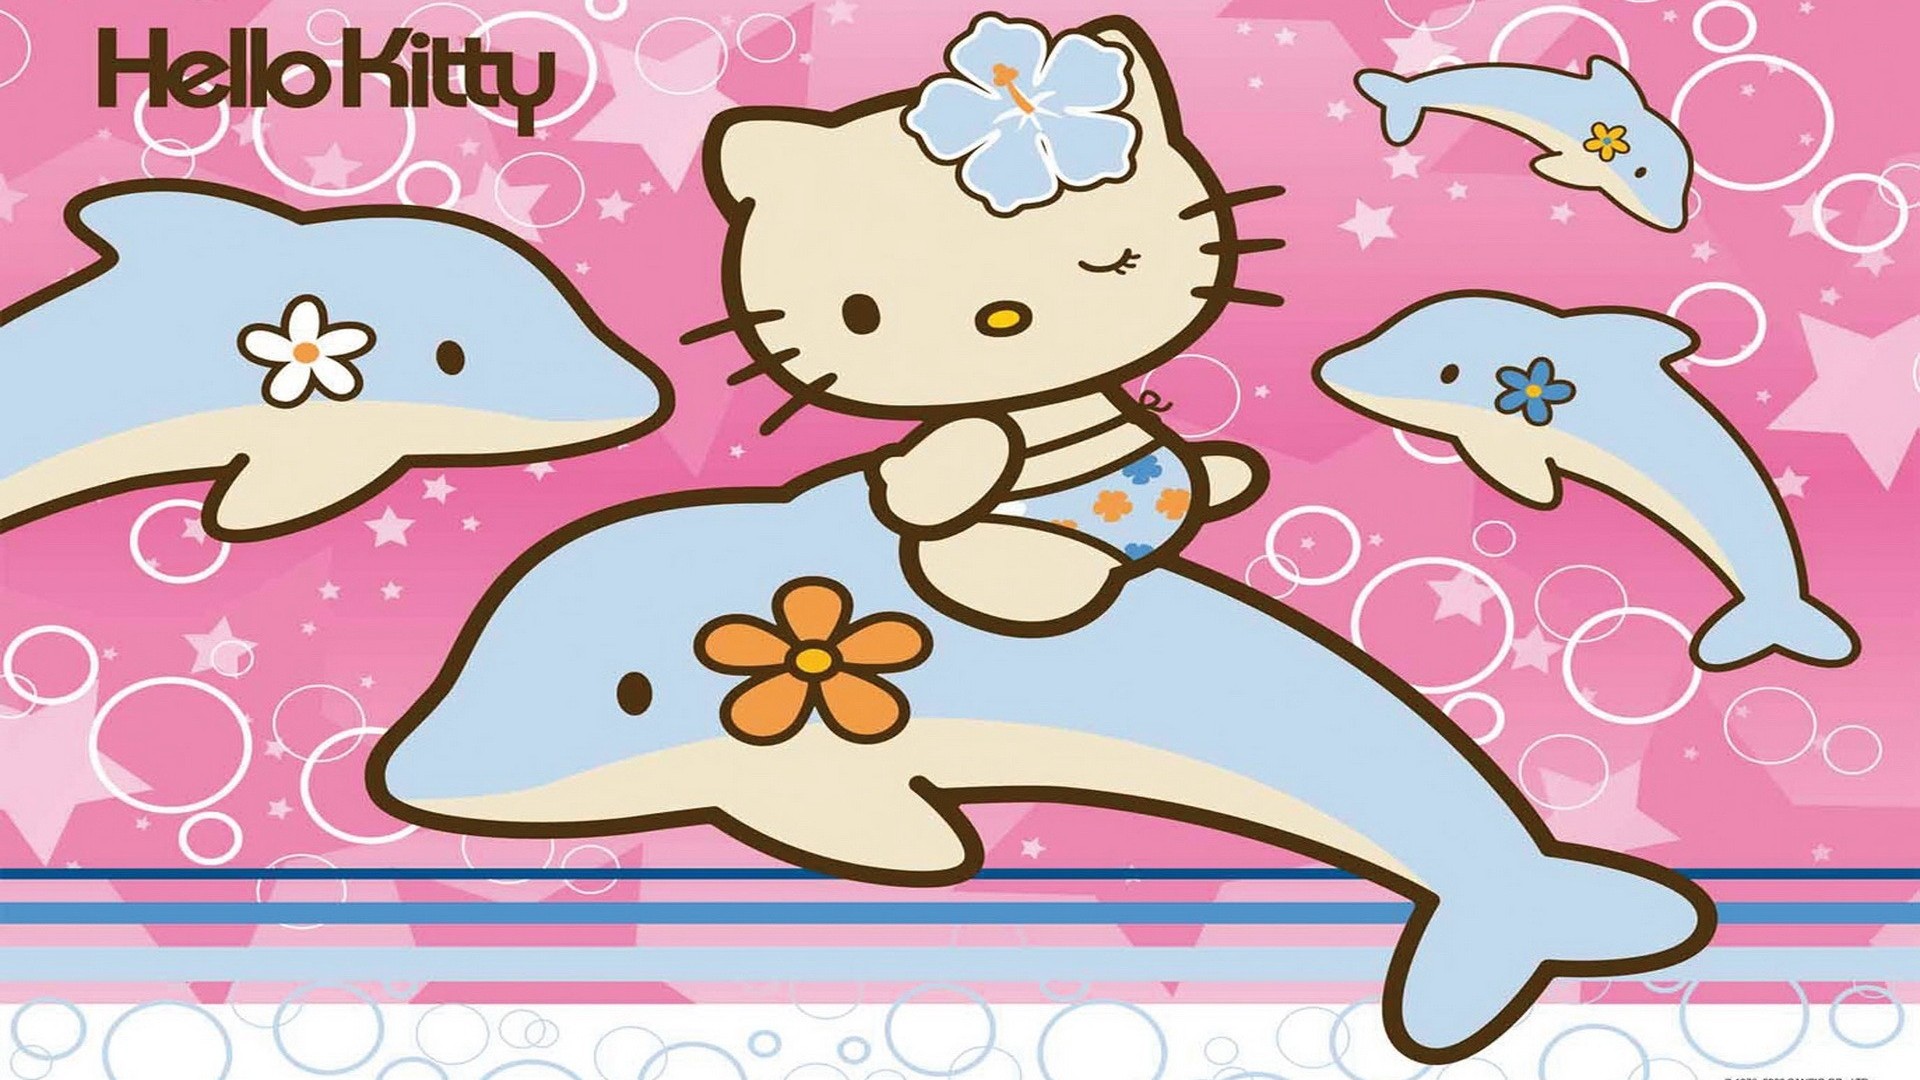 Hello Kitty Pictures HD Wallpaper with image resolution 1920x1080 pixel. You can make this wallpaper for your Desktop Computer Backgrounds, Mac Wallpapers, Android Lock screen or iPhone Screensavers